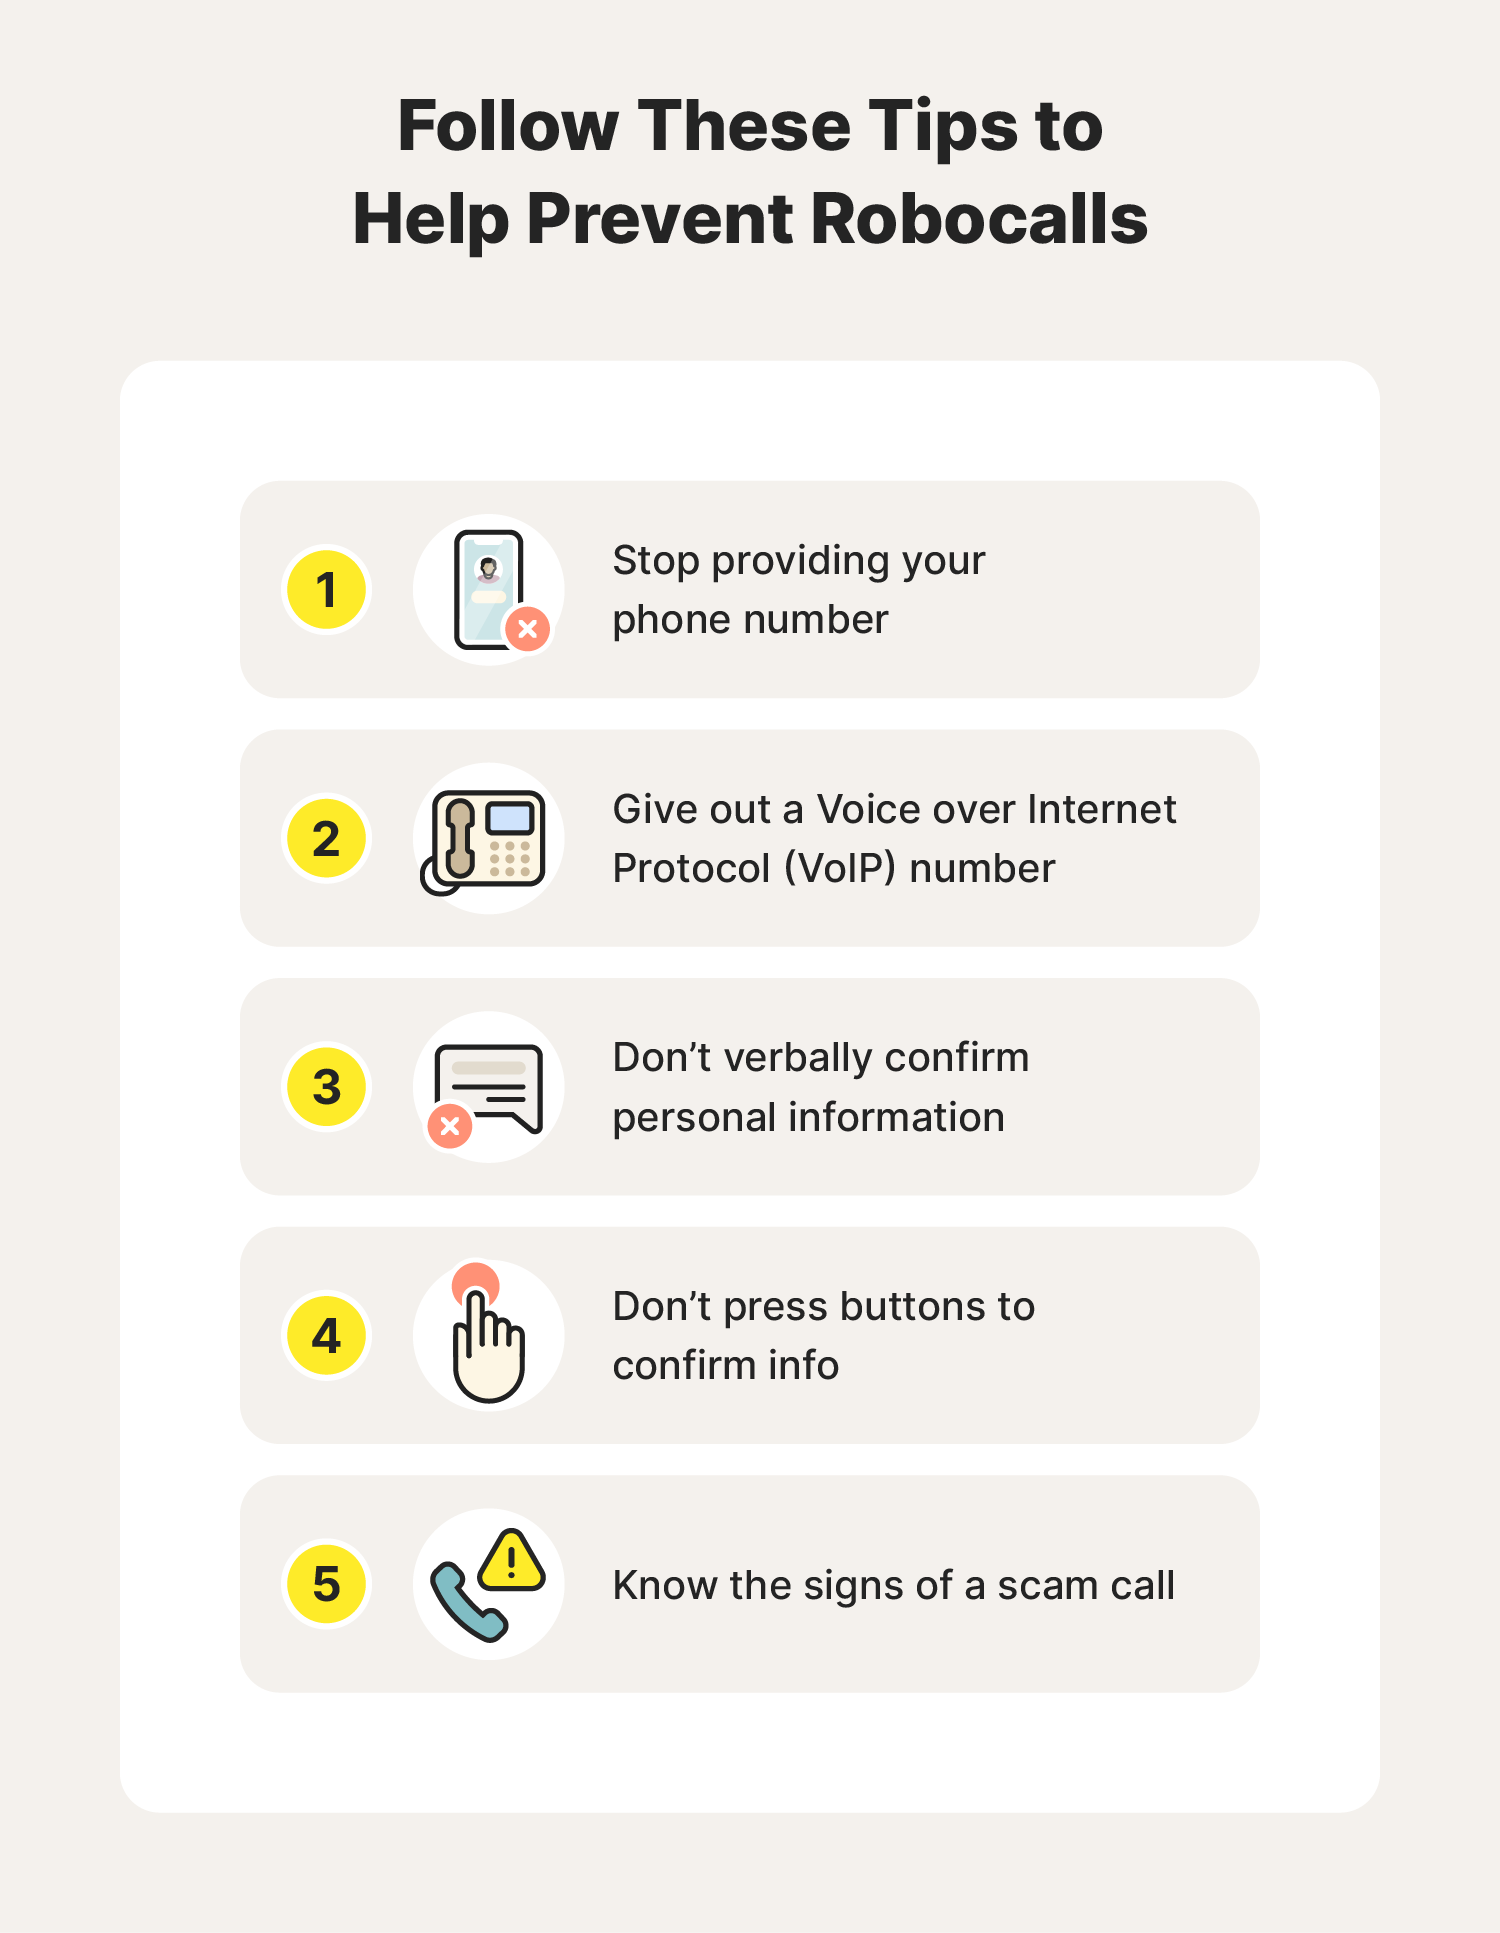 A graphic shares five tips to help prevent robocalls.